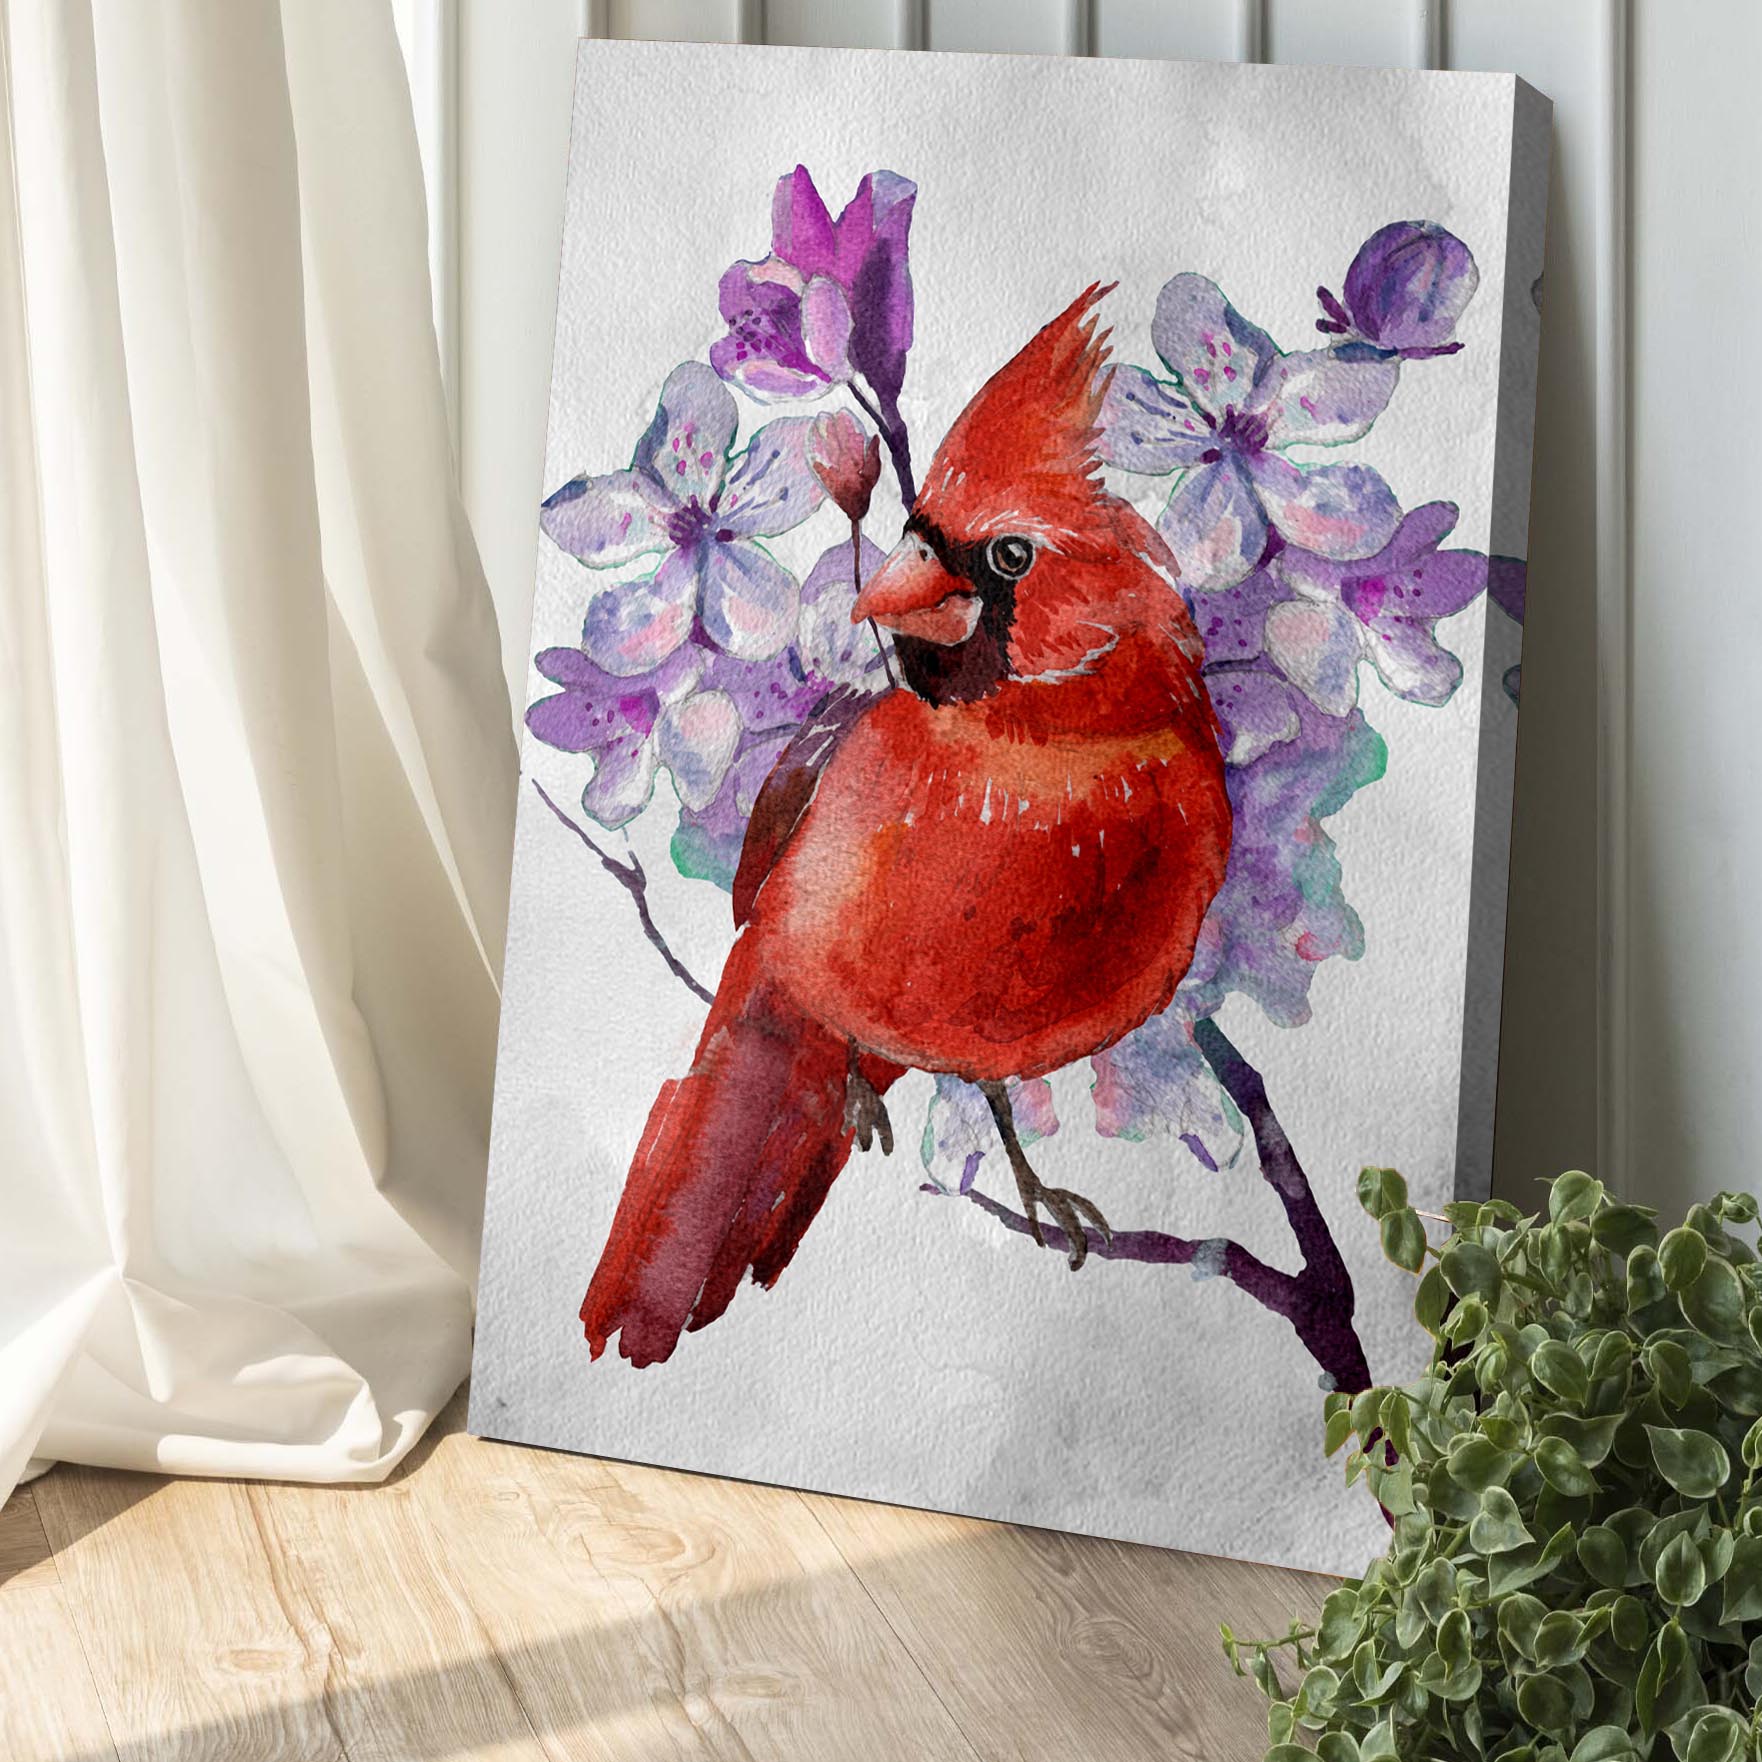 Floral Cardinal Bird Canvas Wall Art Style 2 - Image by Tailored Canvases